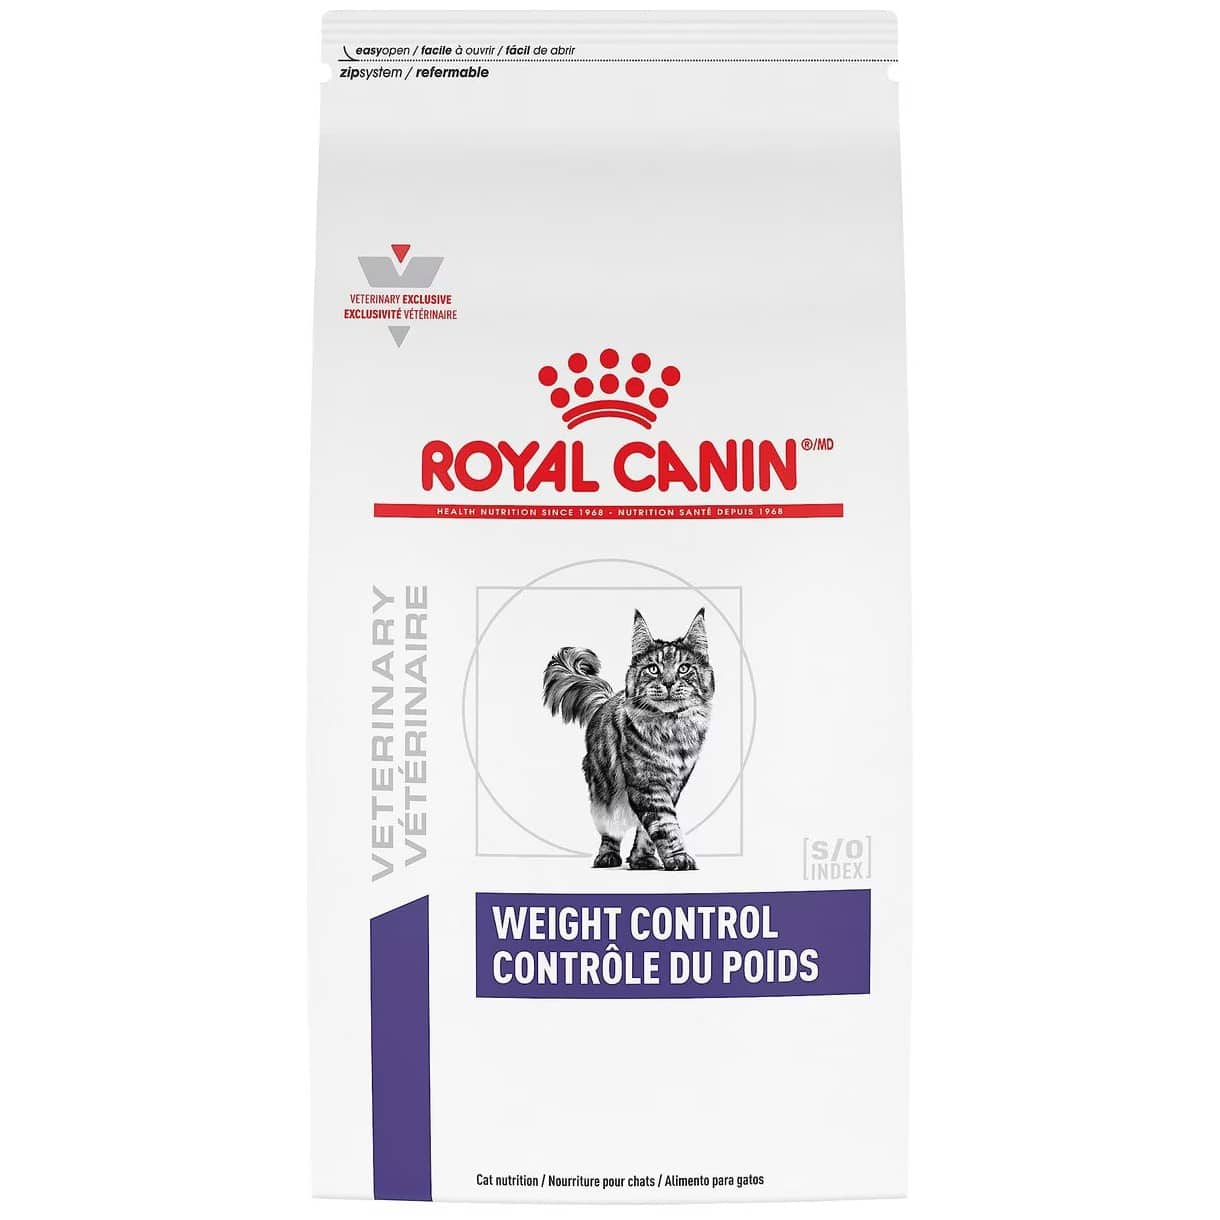 Royal Canin Veterinary Diet Adult Weight Control Dry Cat Food